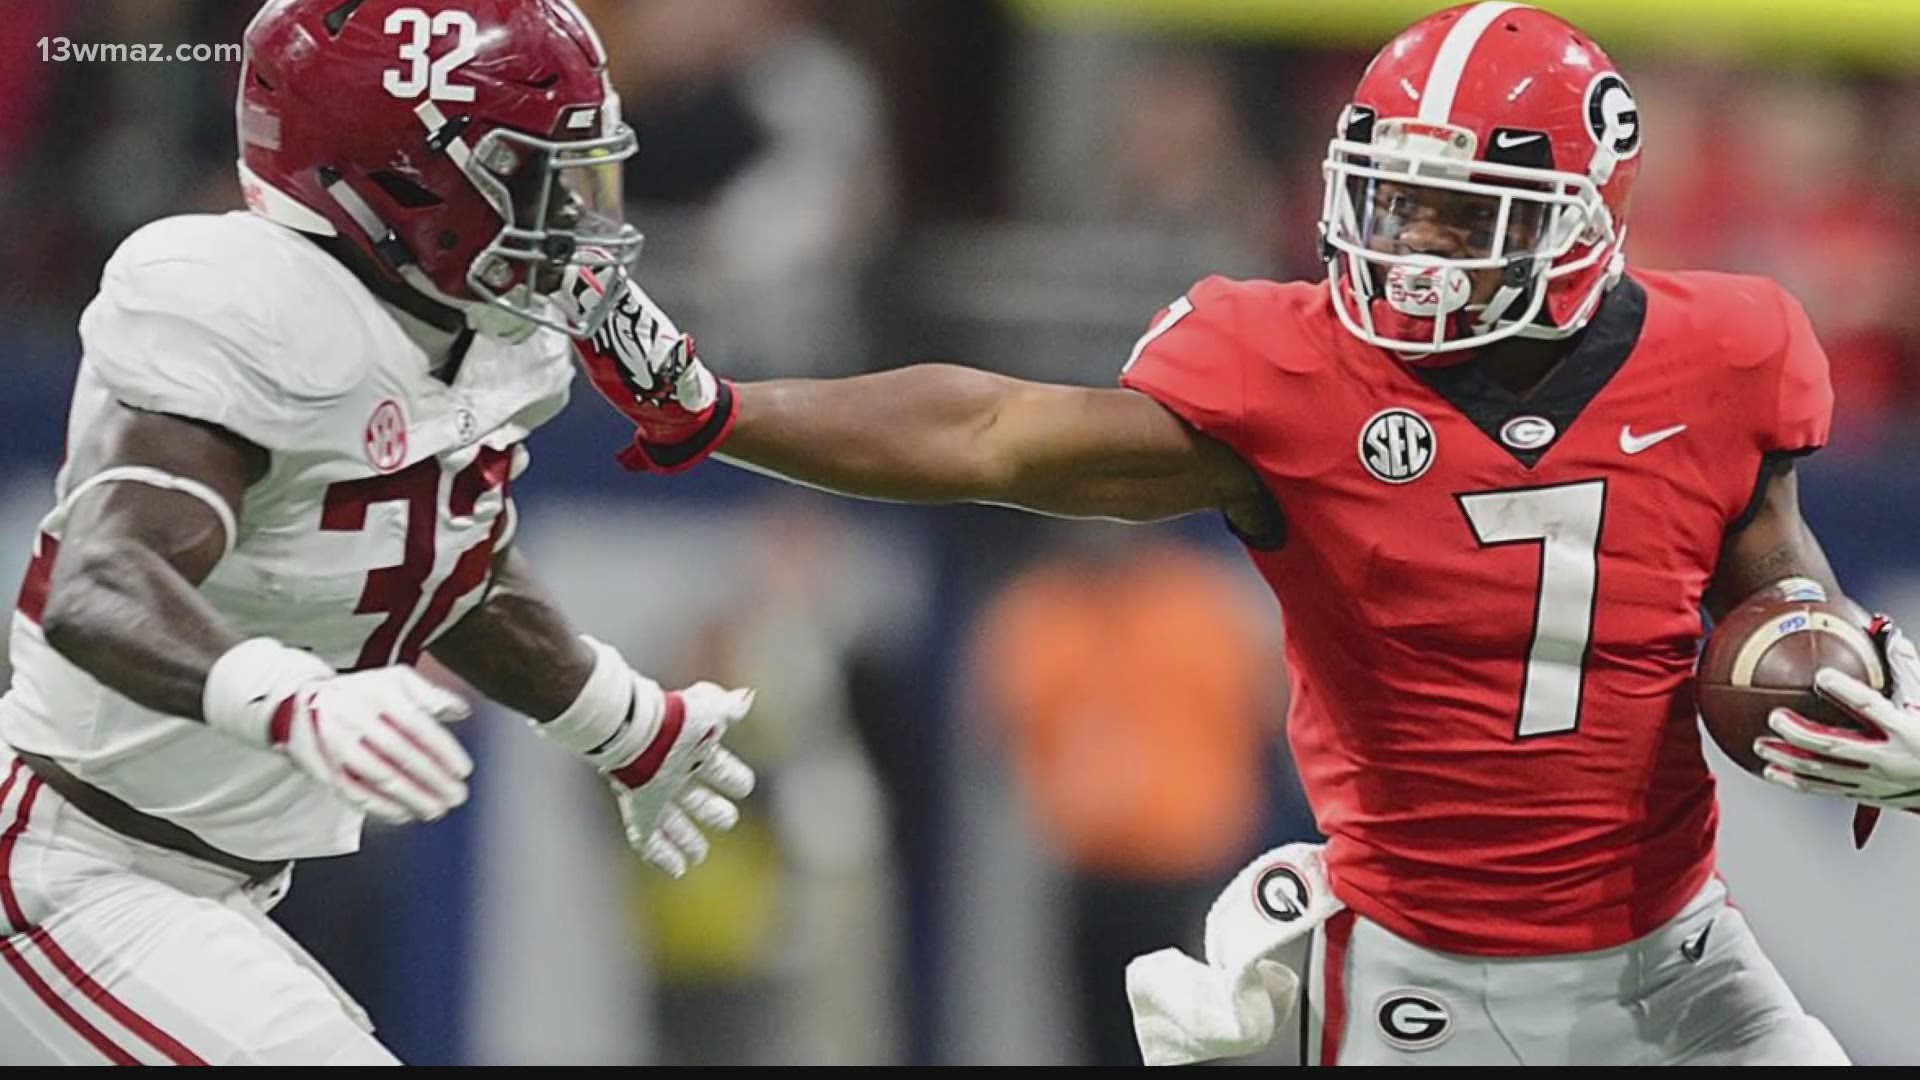 The SEC kicks off this Saturday. Georgia is on the road with Arkansas. Will UGA play in the SEC championship?